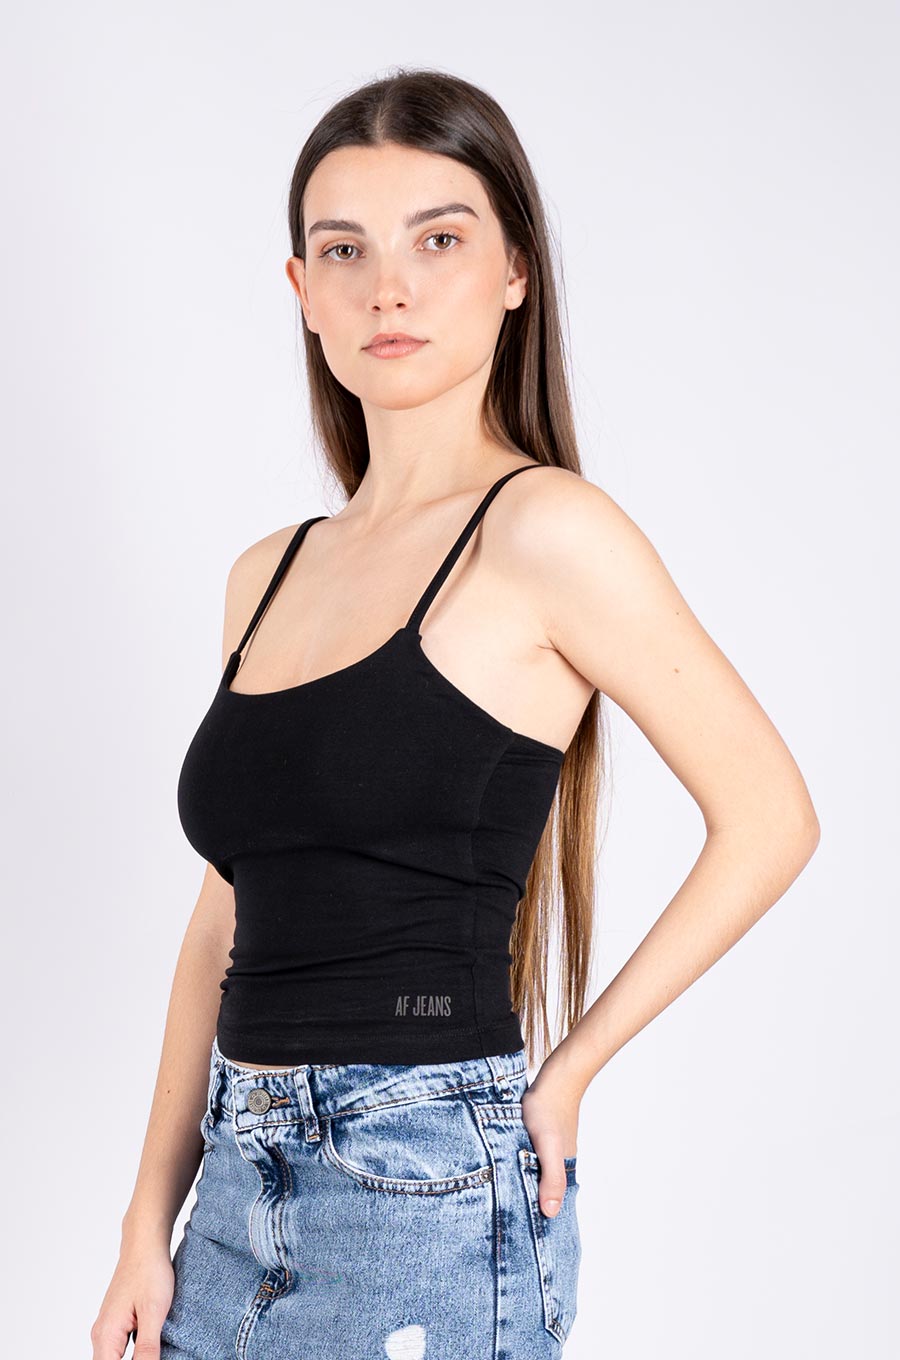 AF Jeans - A223203002 Musculosa Aries Negro lateral - Córdoba